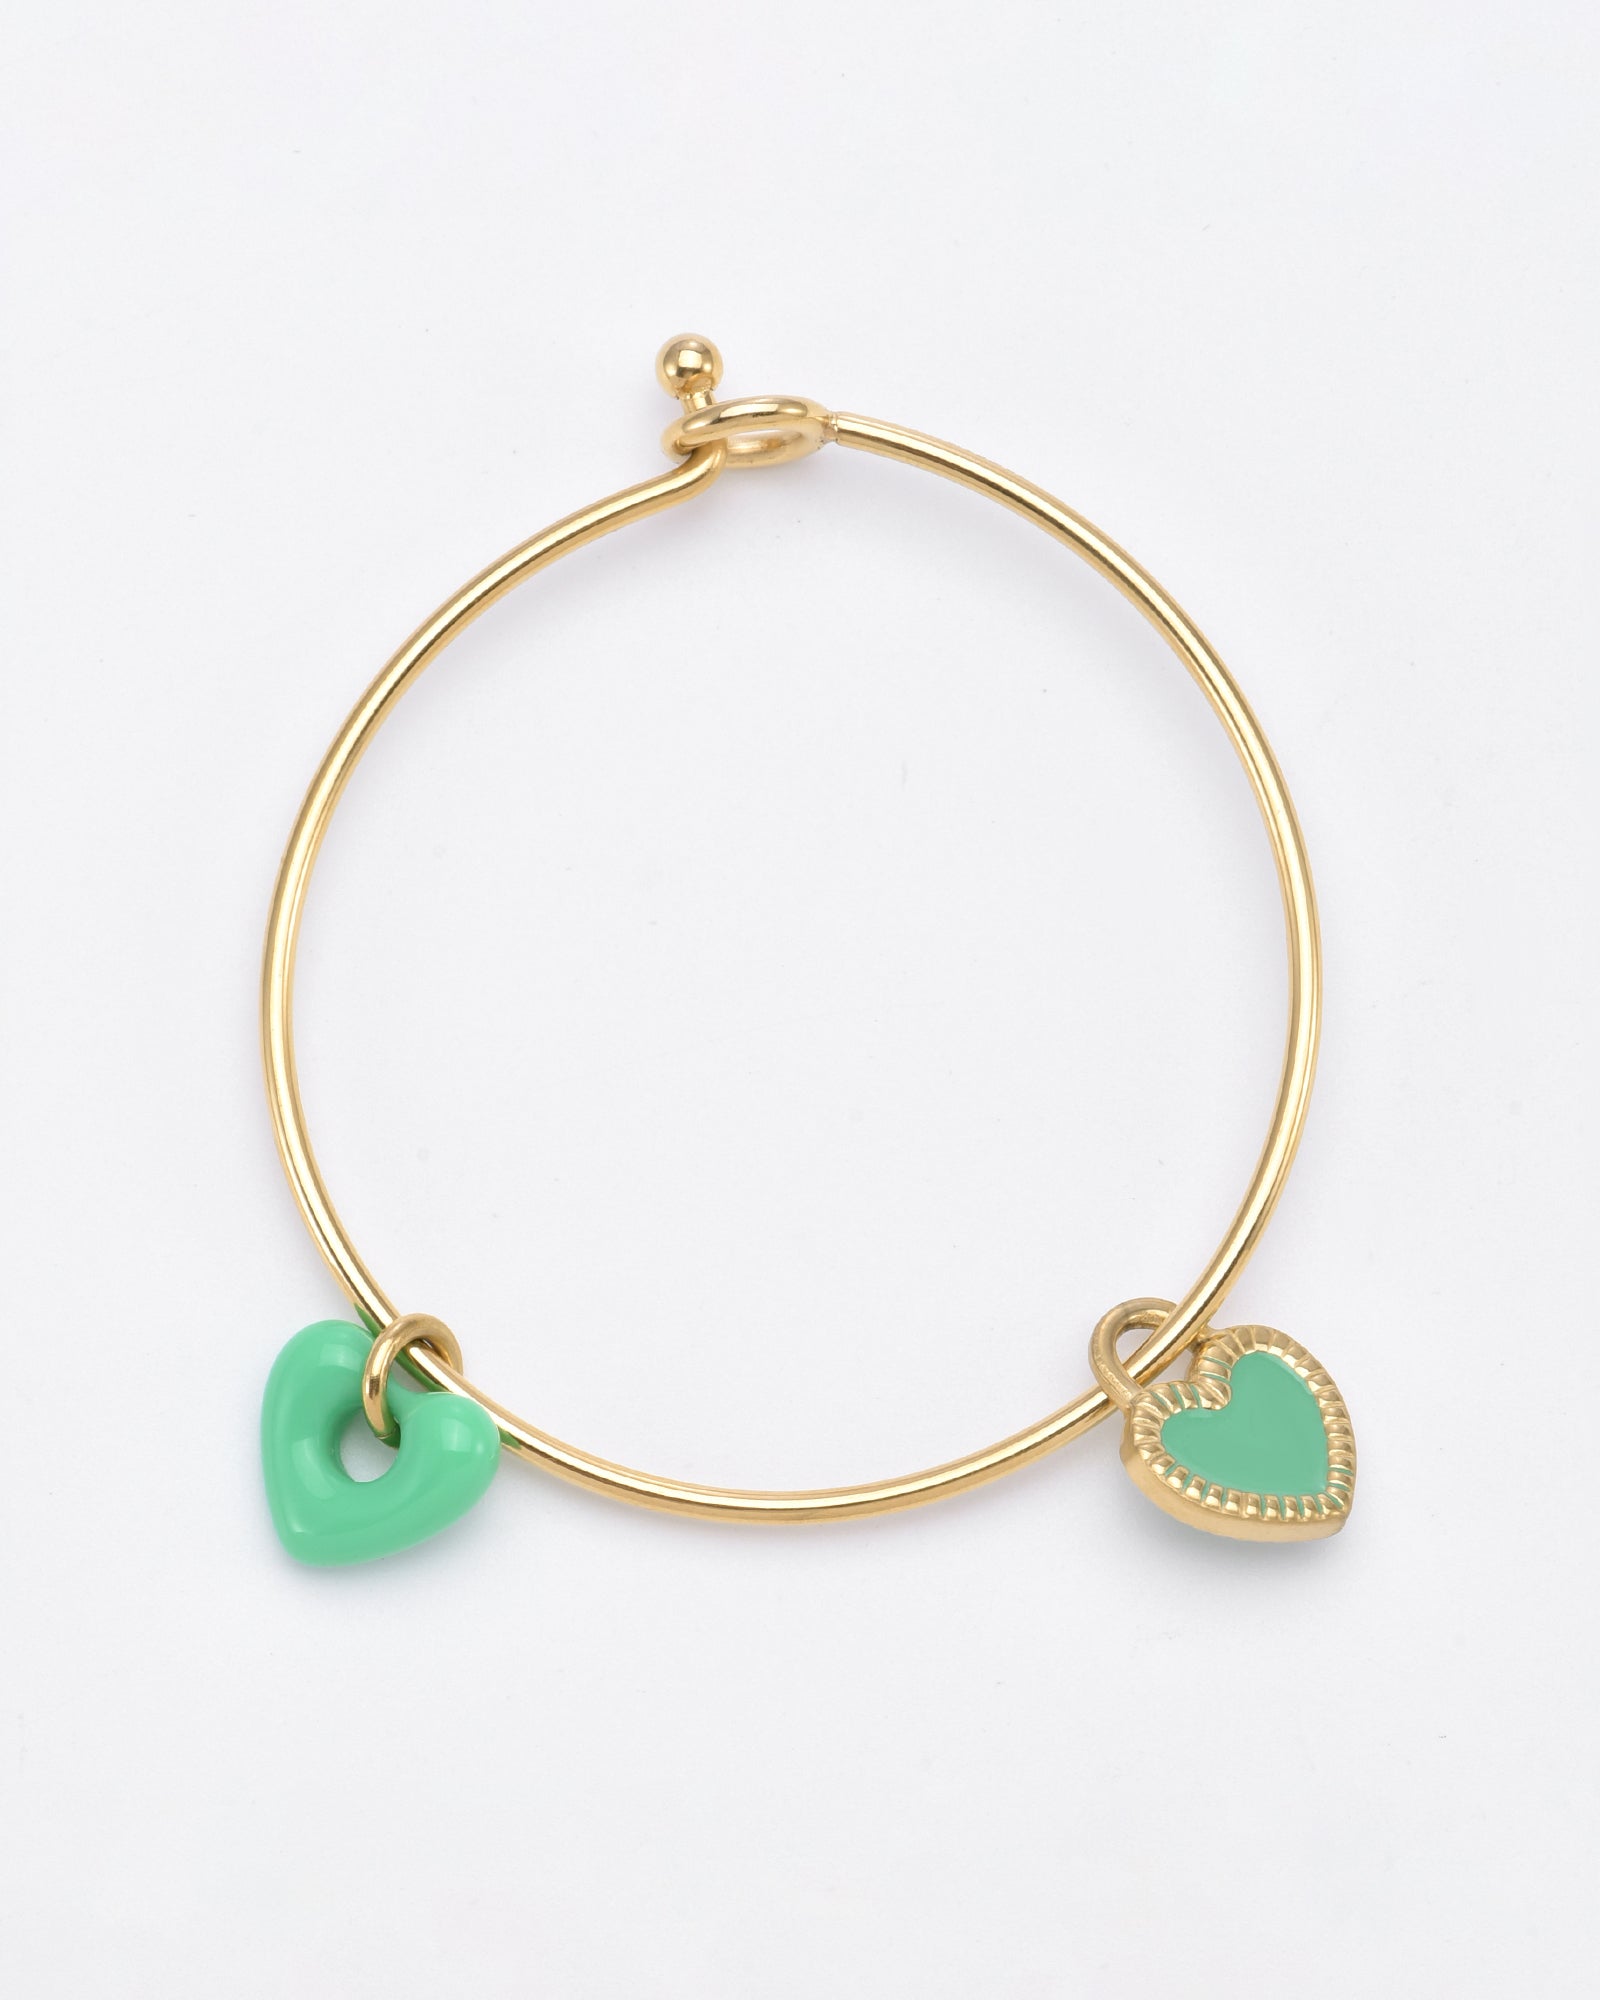 A minimalistic, delicate Double Heart Bracelet Gold featuring two heart-shaped charms by For Art's Sake®. One charm is a smooth, solid green heart, while the other is a decorated gold heart with a green center. The 24k gold plating adds an extra touch of elegance. The bracelet is set against a plain white background.